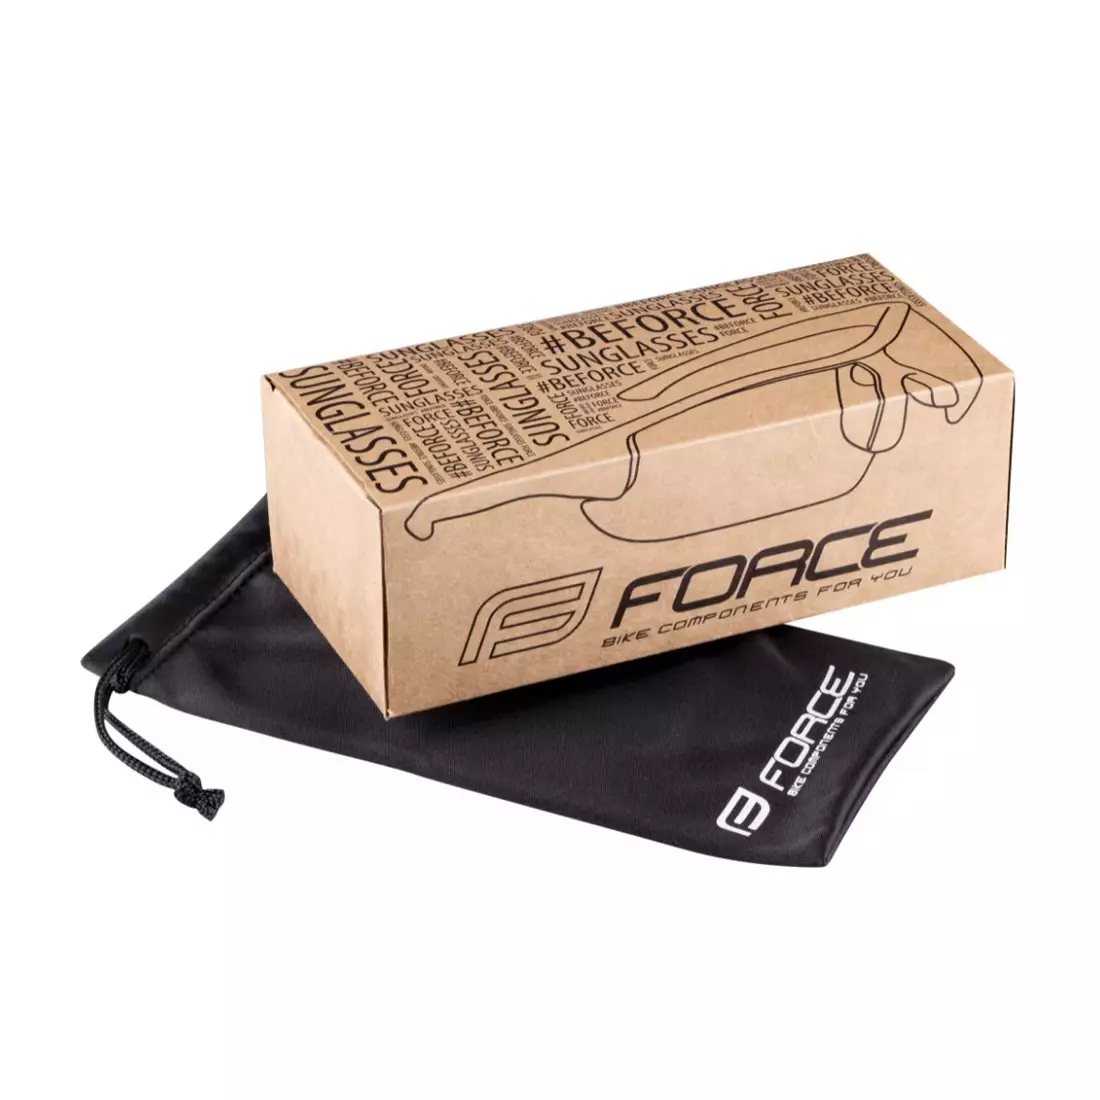 FORCE RACE PRO glasses white/red 909392 